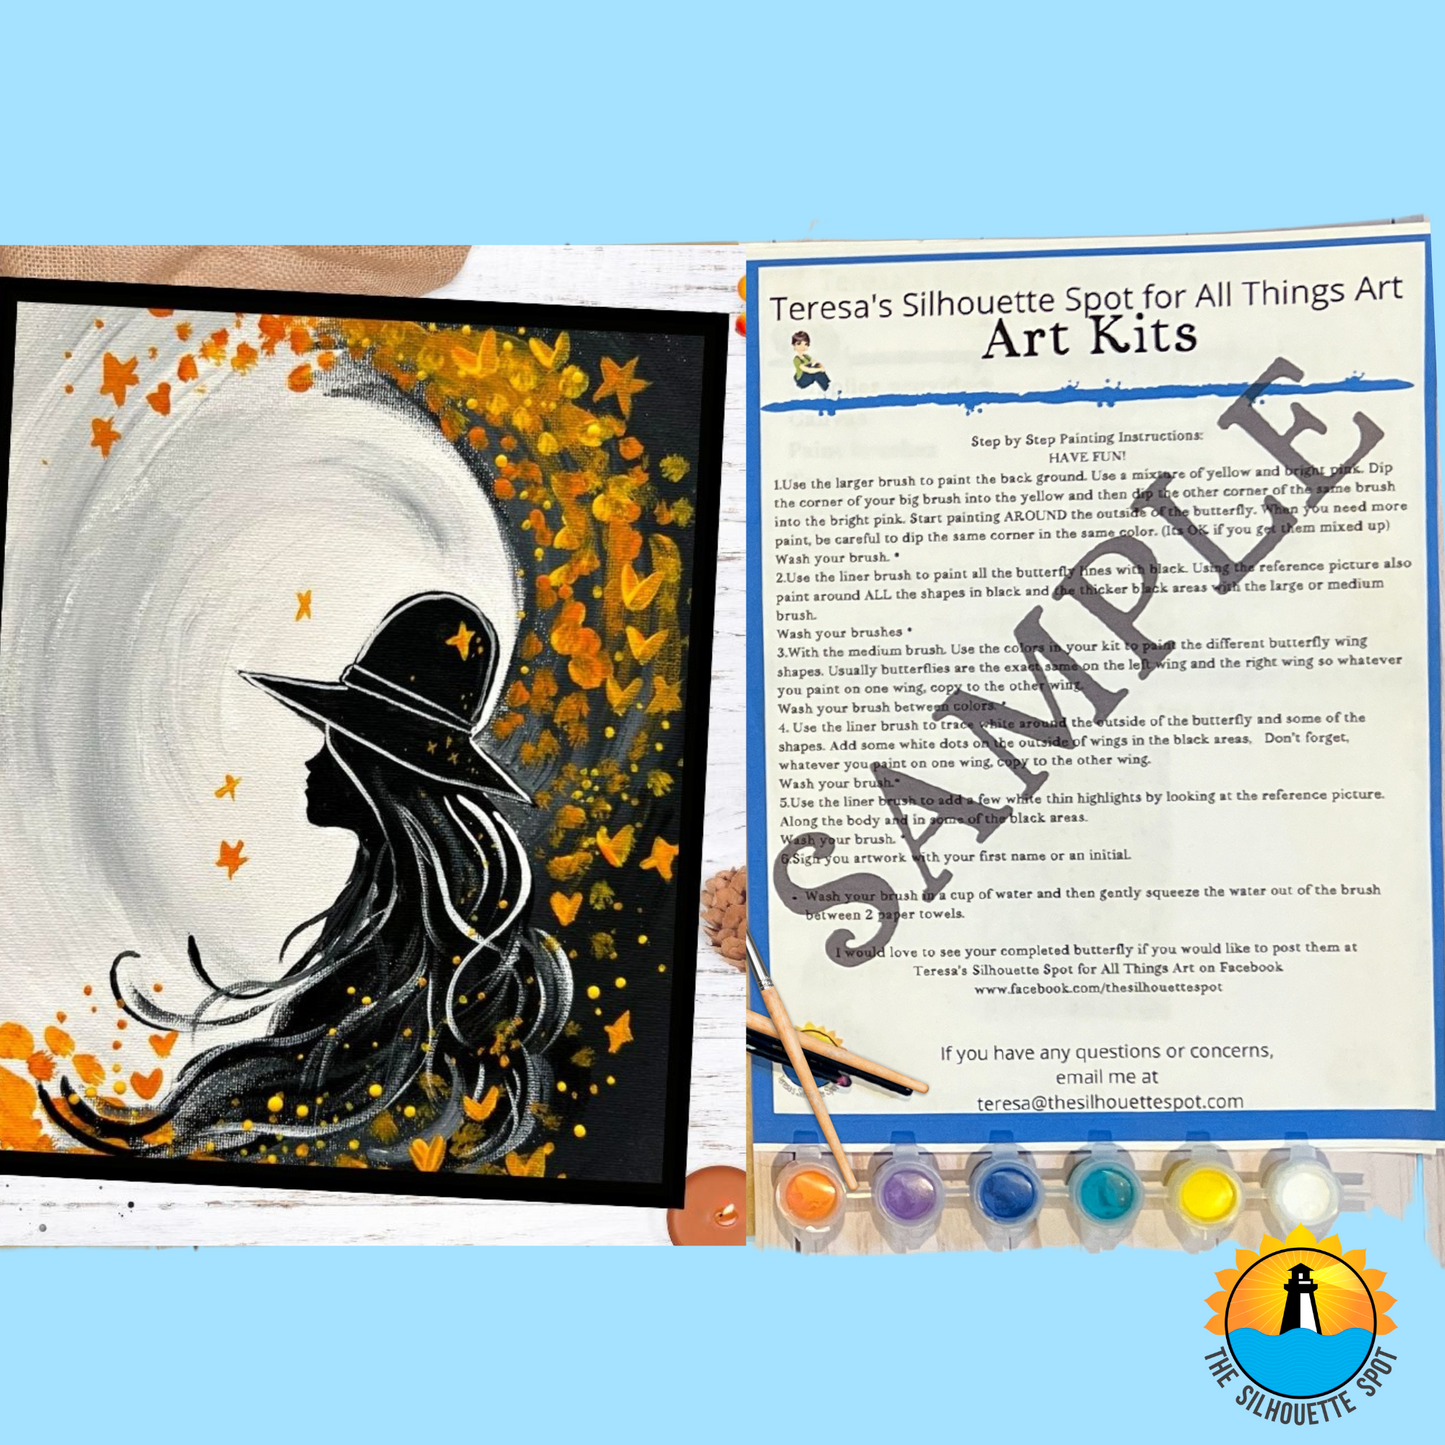 Canvas Complete Art Kit! Virtual at home Magic Woman DIY Art! Great For Beginners!